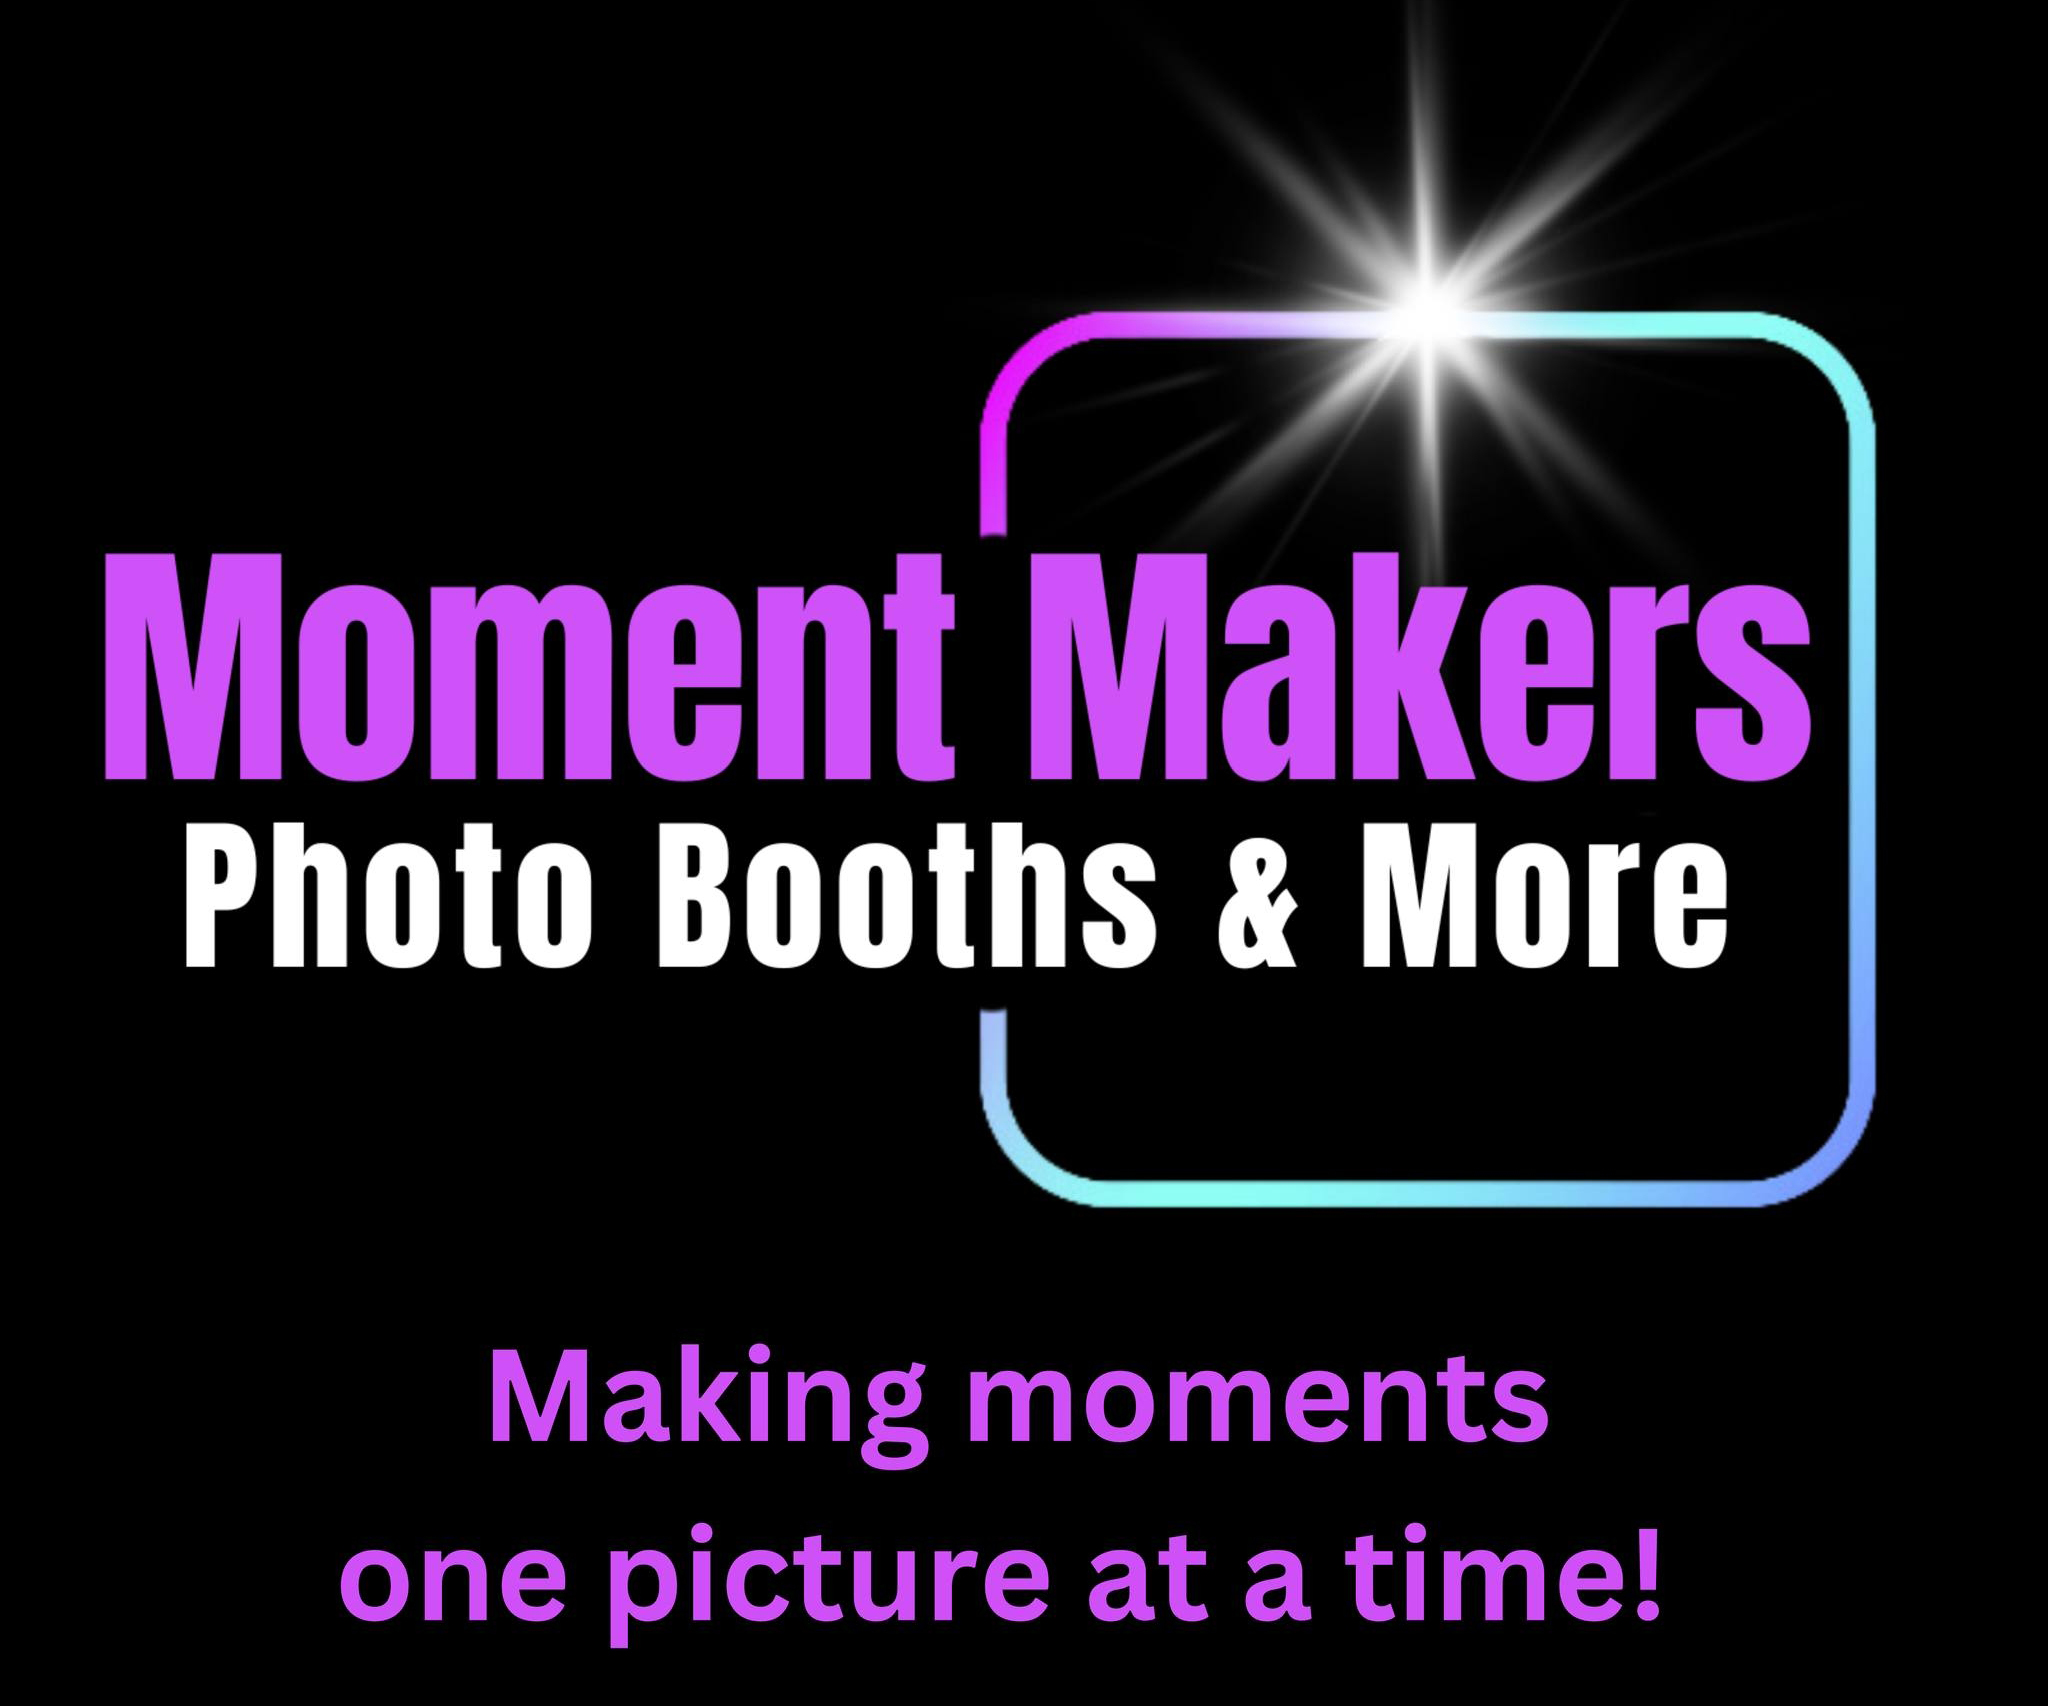 Moment Makers Photo Booths & More company logo